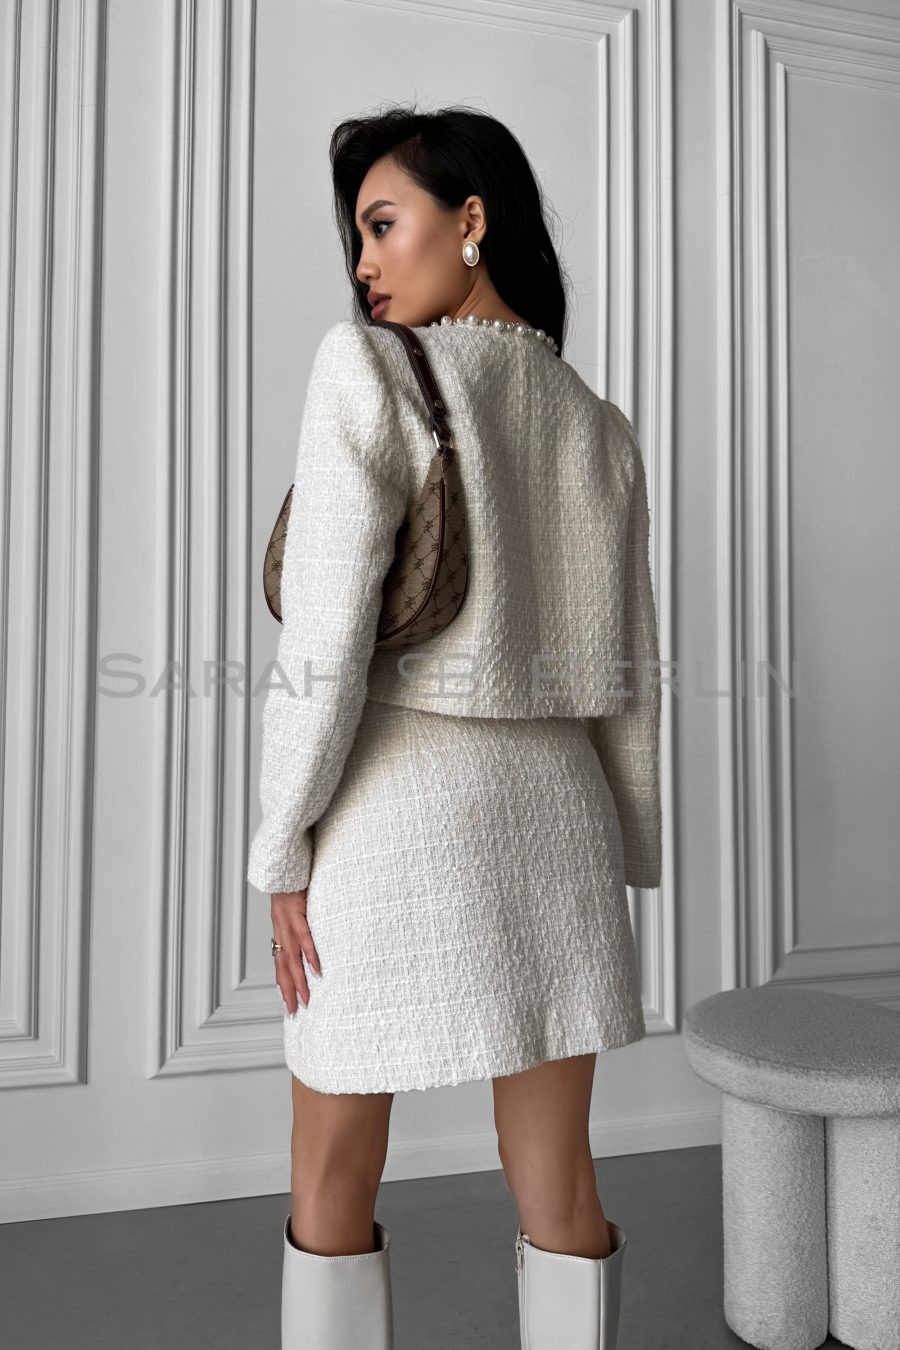 Tweed cotton jacket with double clasp, embroidered with pearls and stones